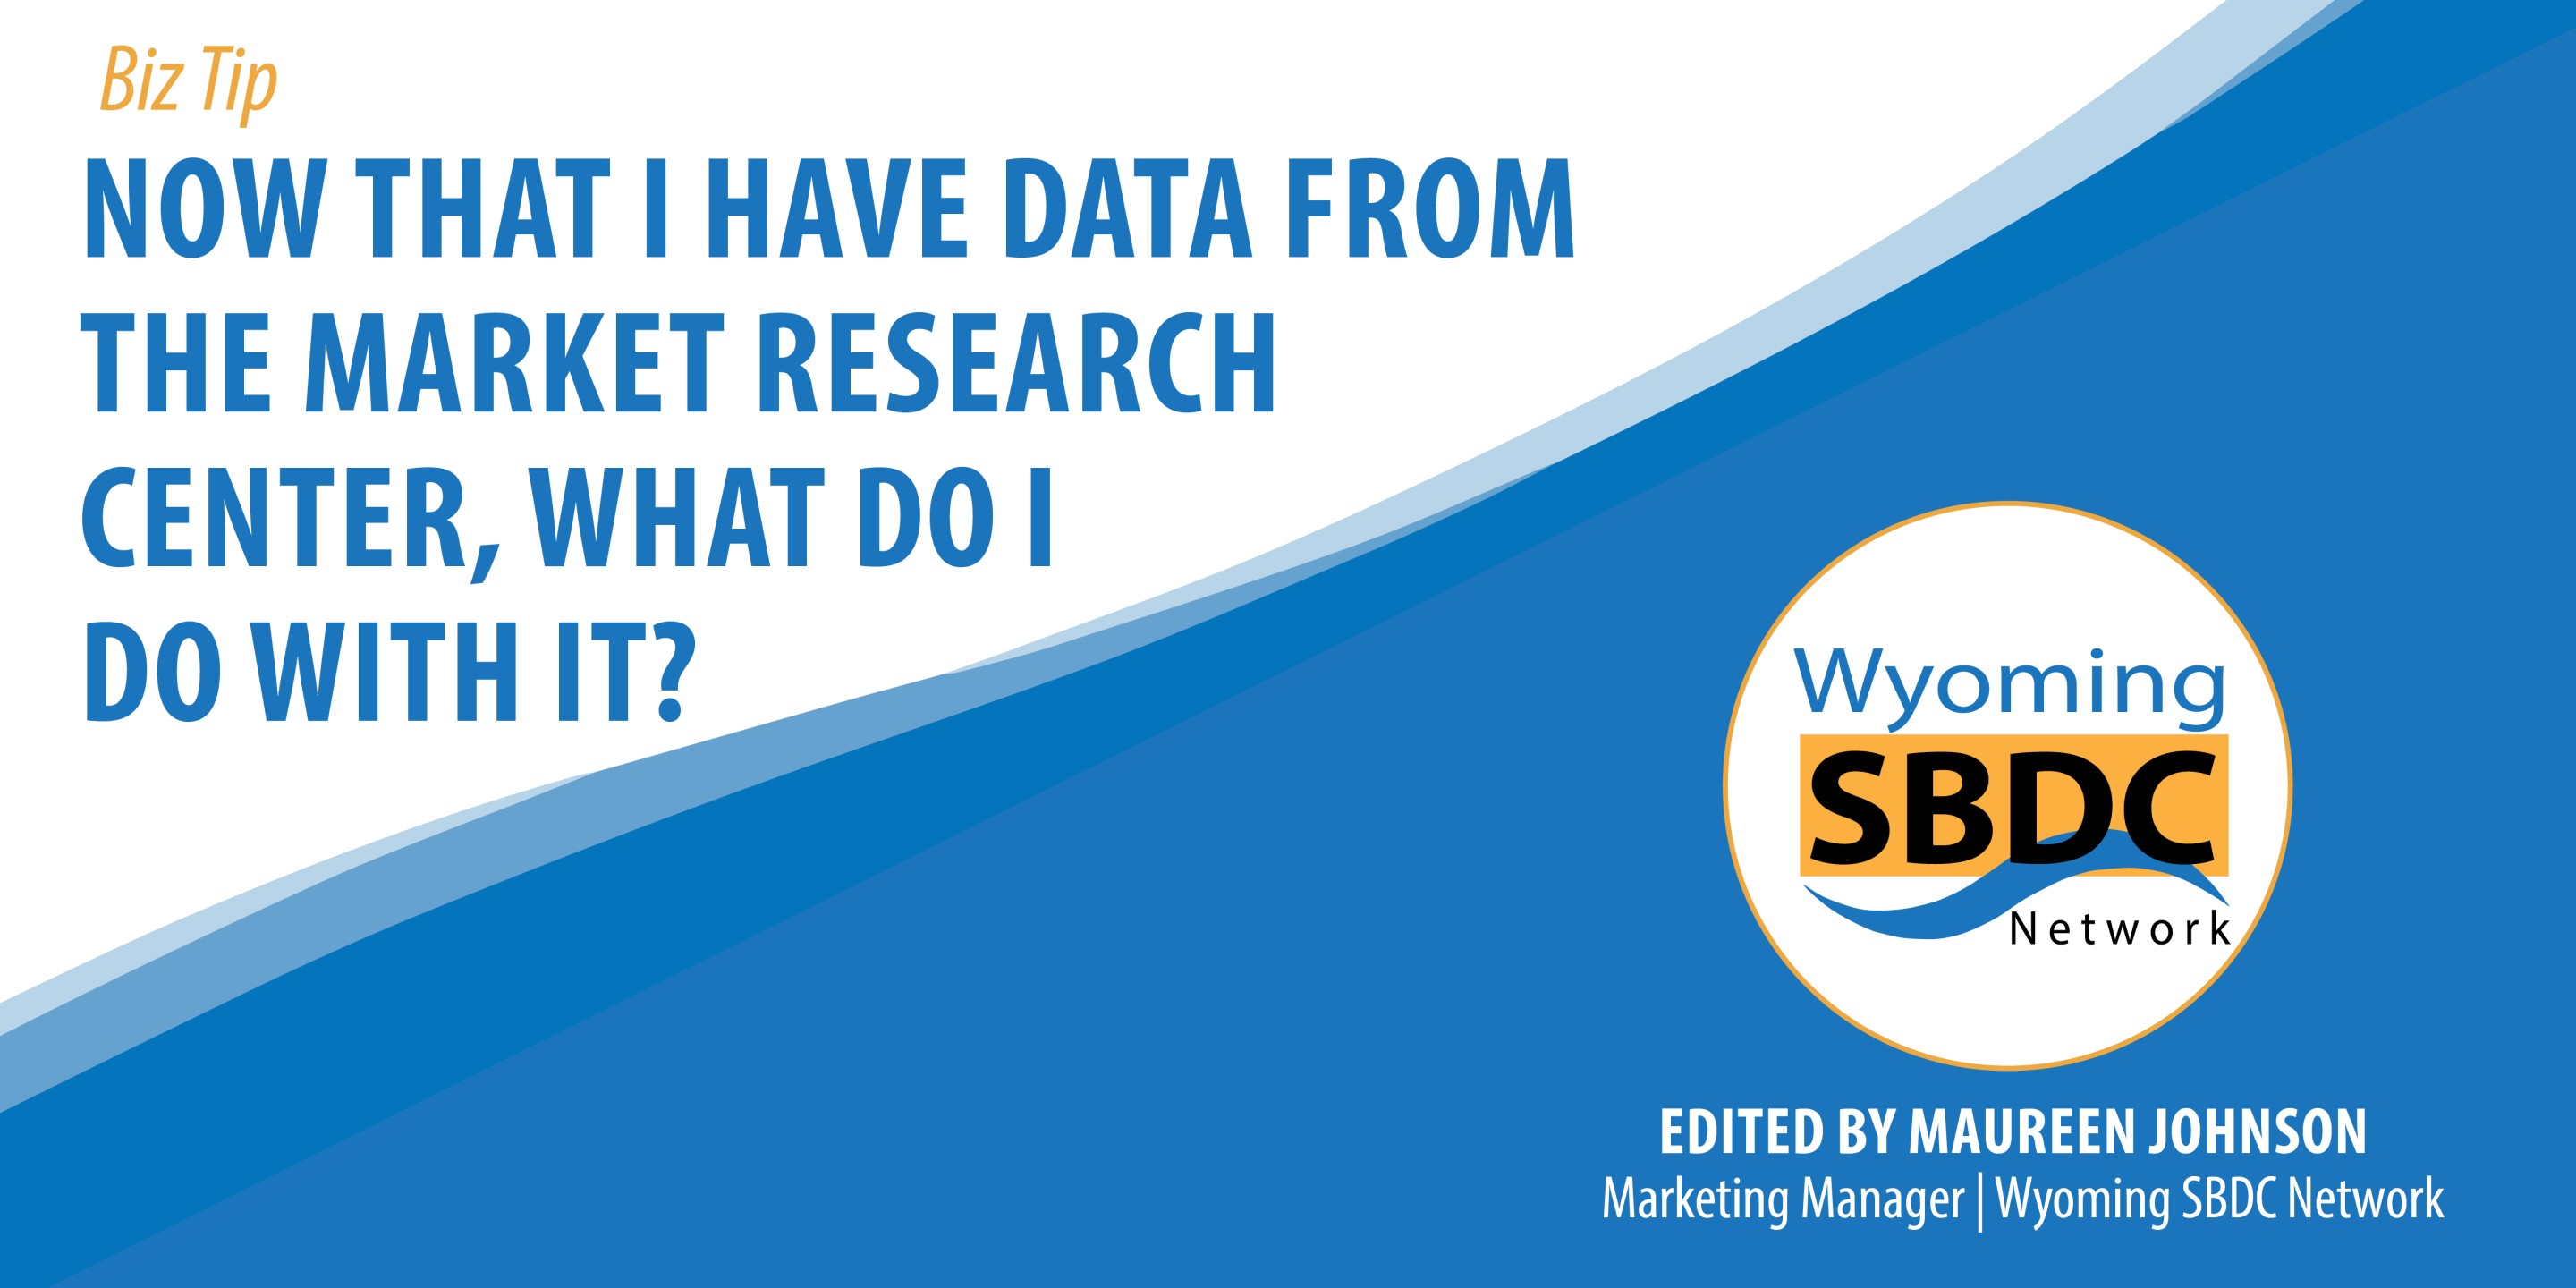 Now that I have data from the Market Research Center, what do I do with it?